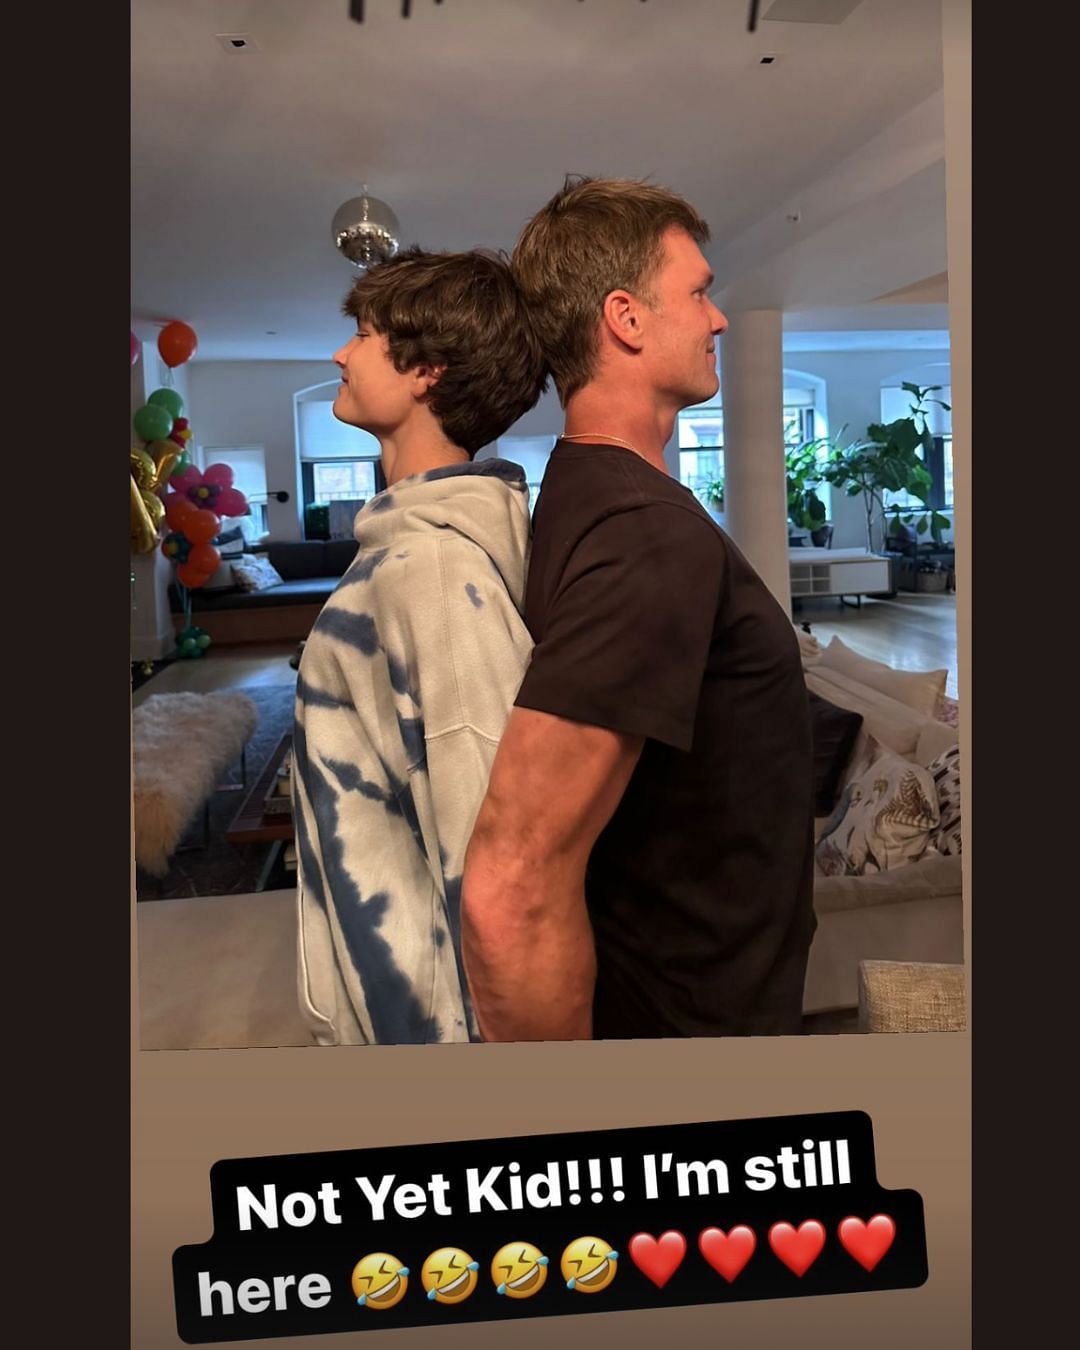 Brady with a message to his son as he&#039;s nearing his height. Credit: Tom Brady&#039;s official IG